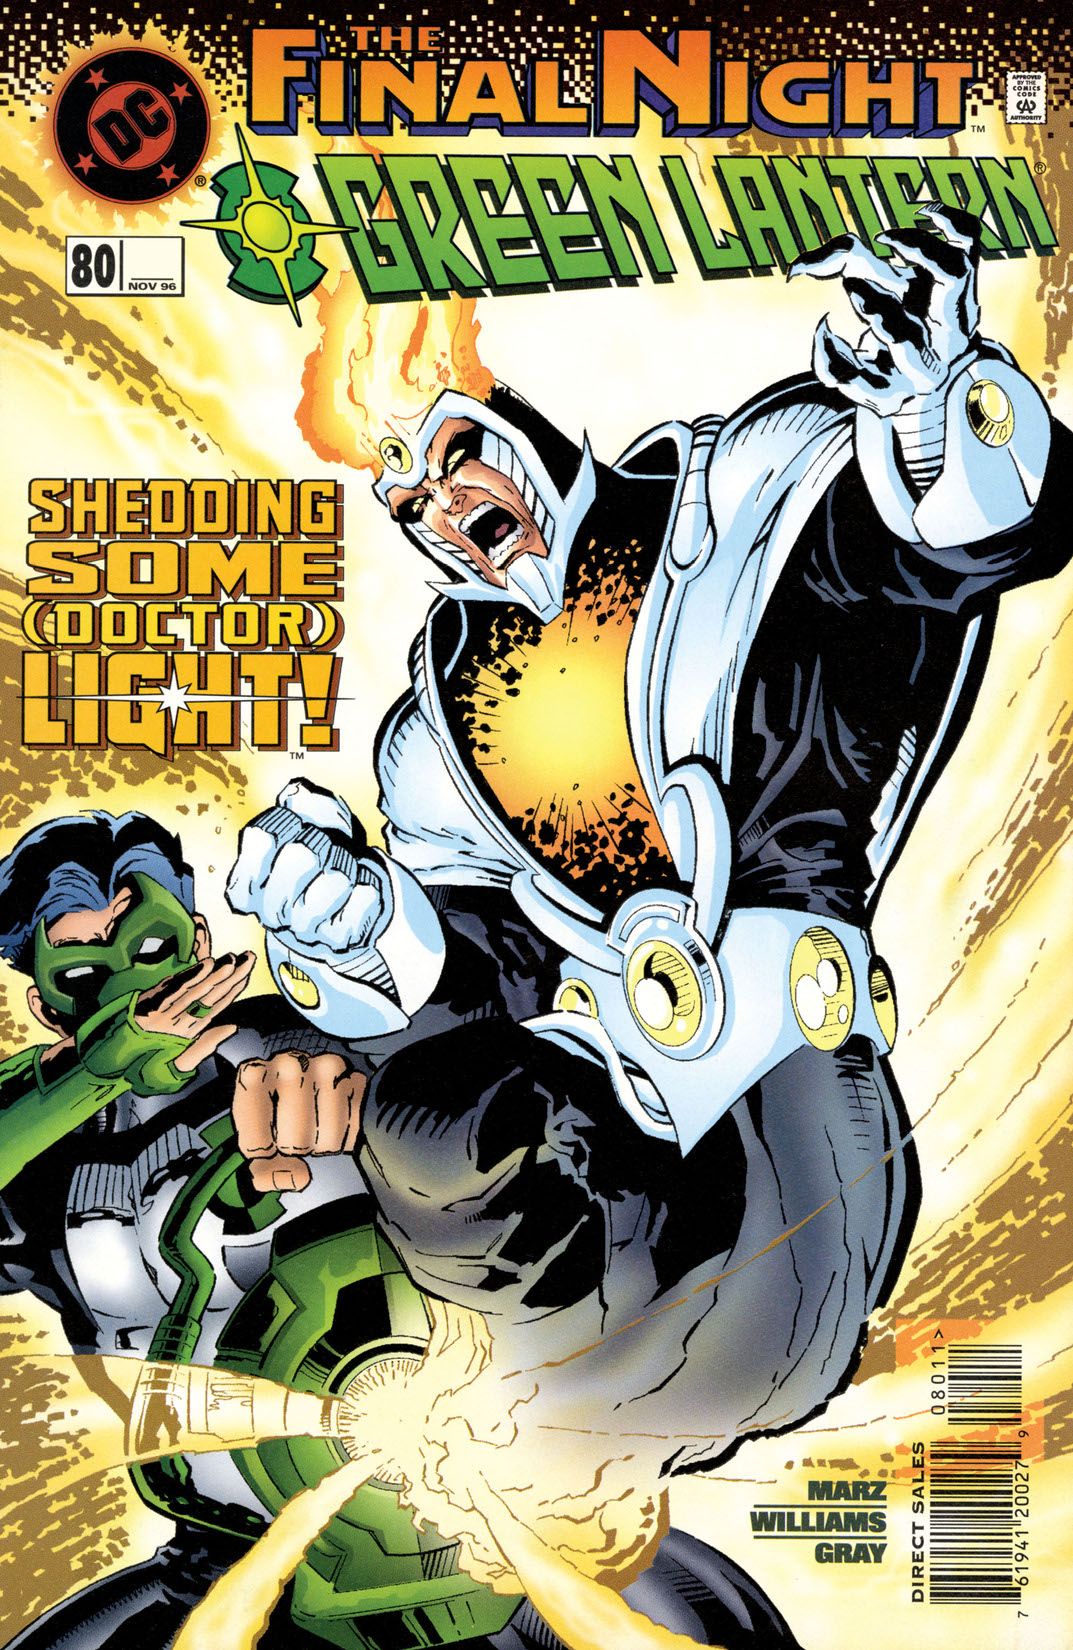 Green Lantern (1990-) #80 preview images